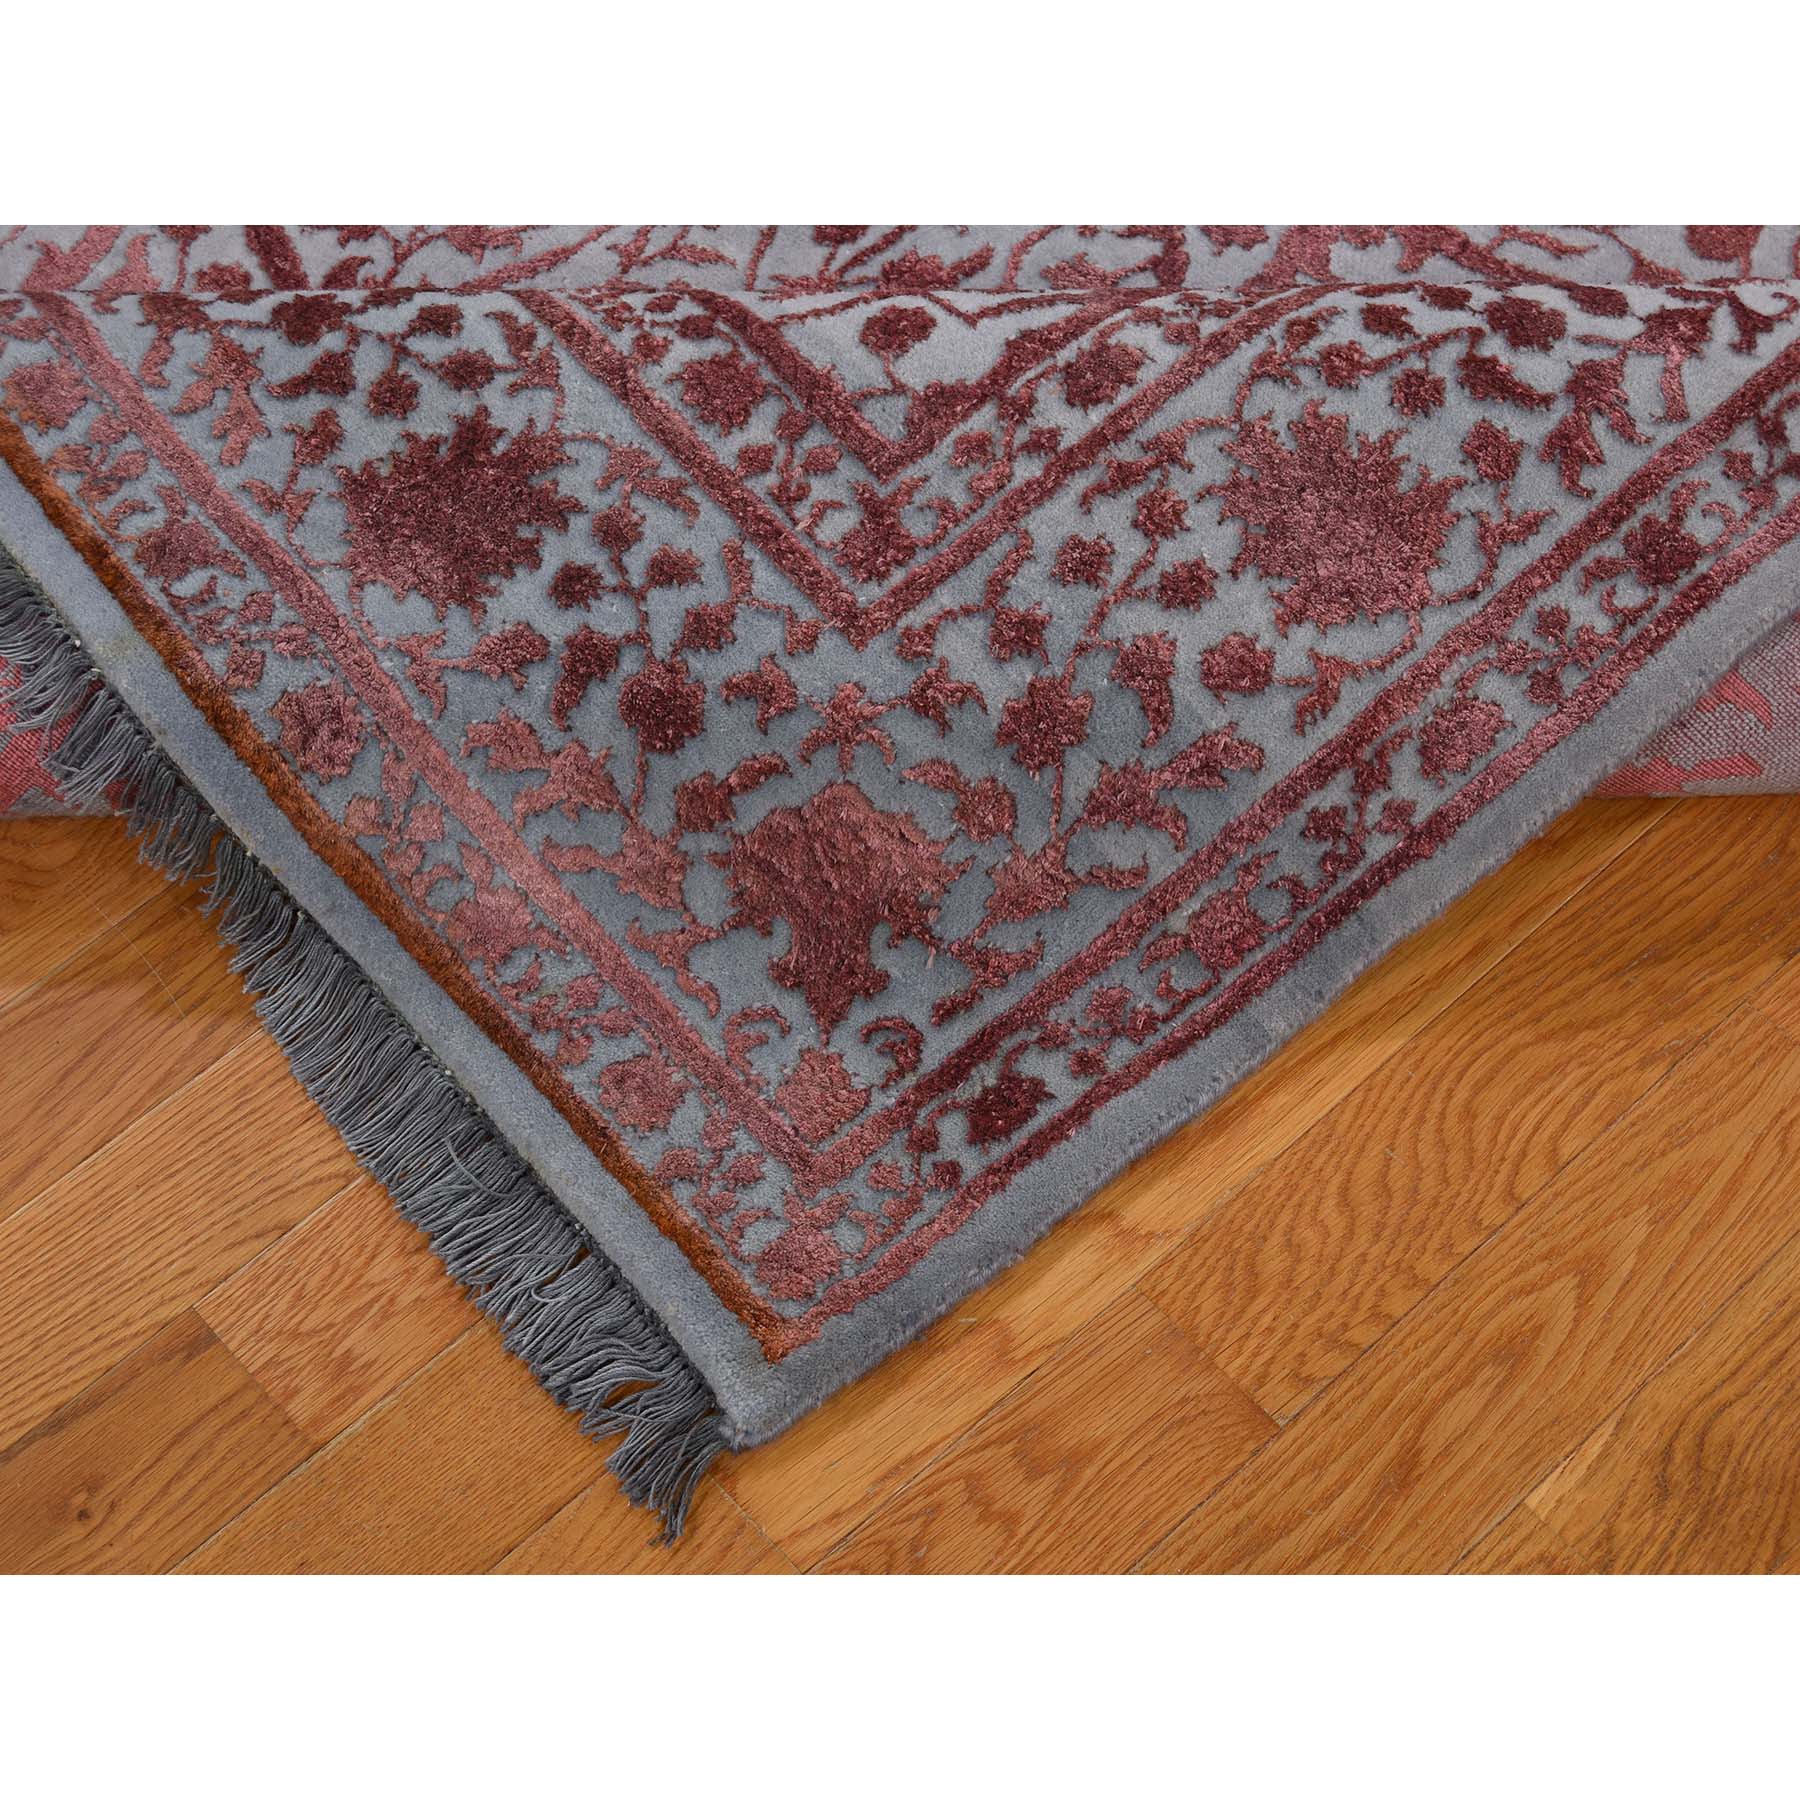 5-9 x9- Kashan Dense Weave Wool And Silk Hand-Knotted Pure Wool Rug 